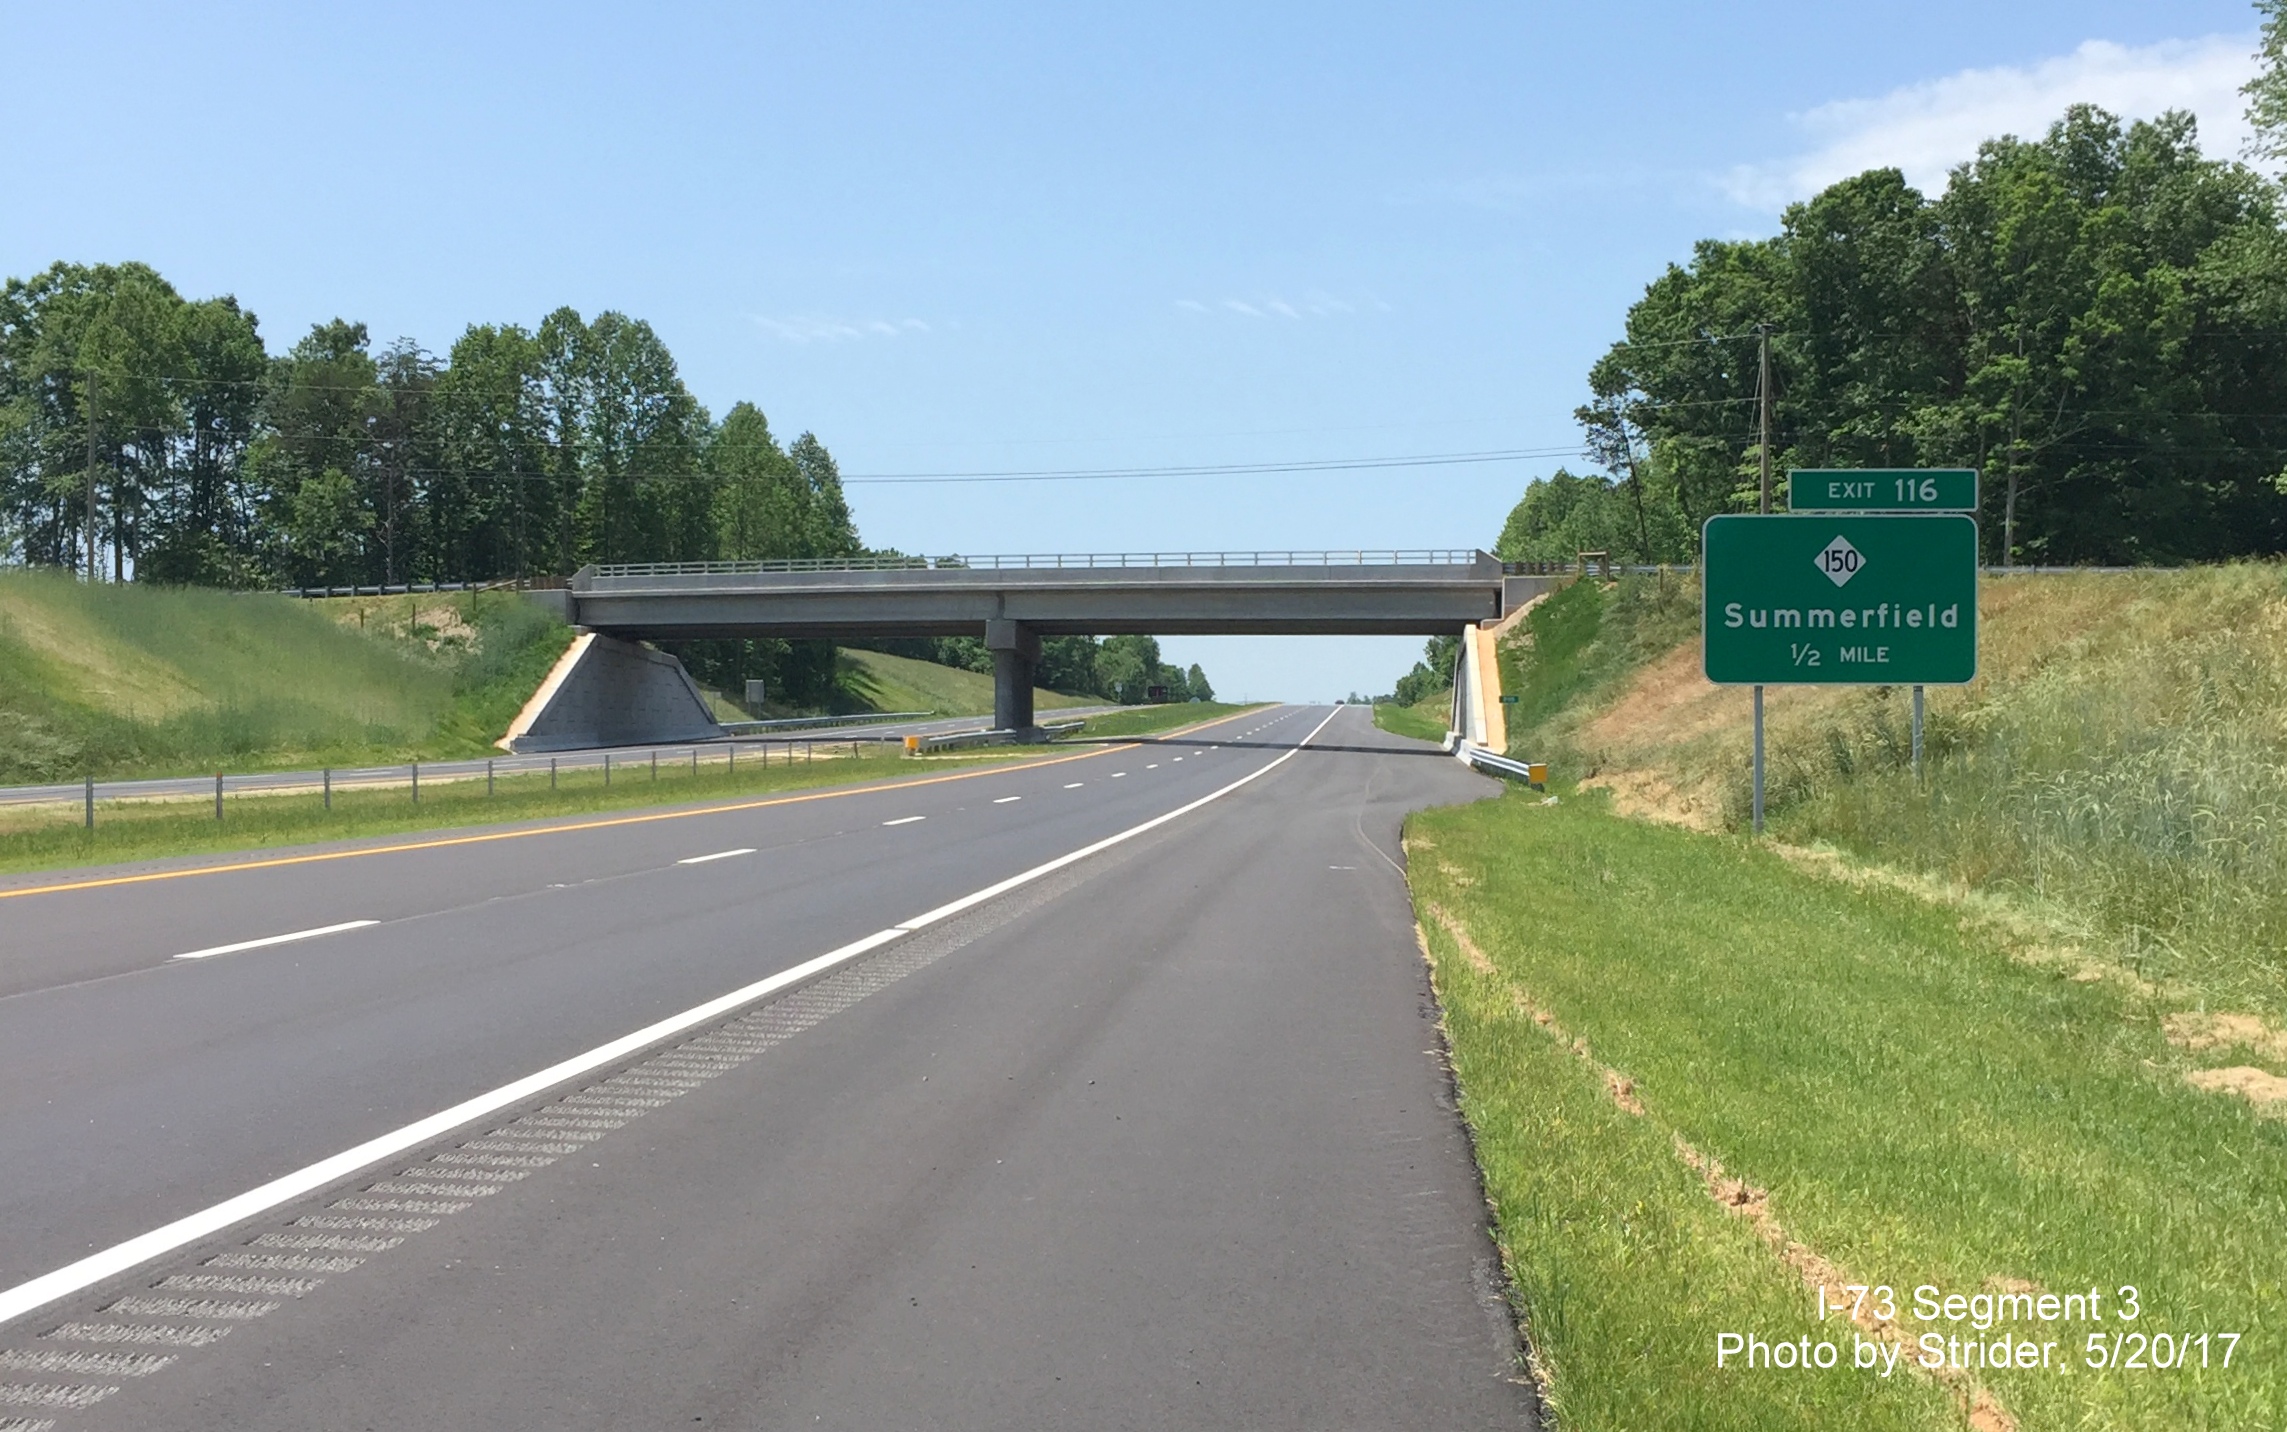 Image taken of new I-73 North highway about to cross Reedy Fork Creek bridge, by Strider